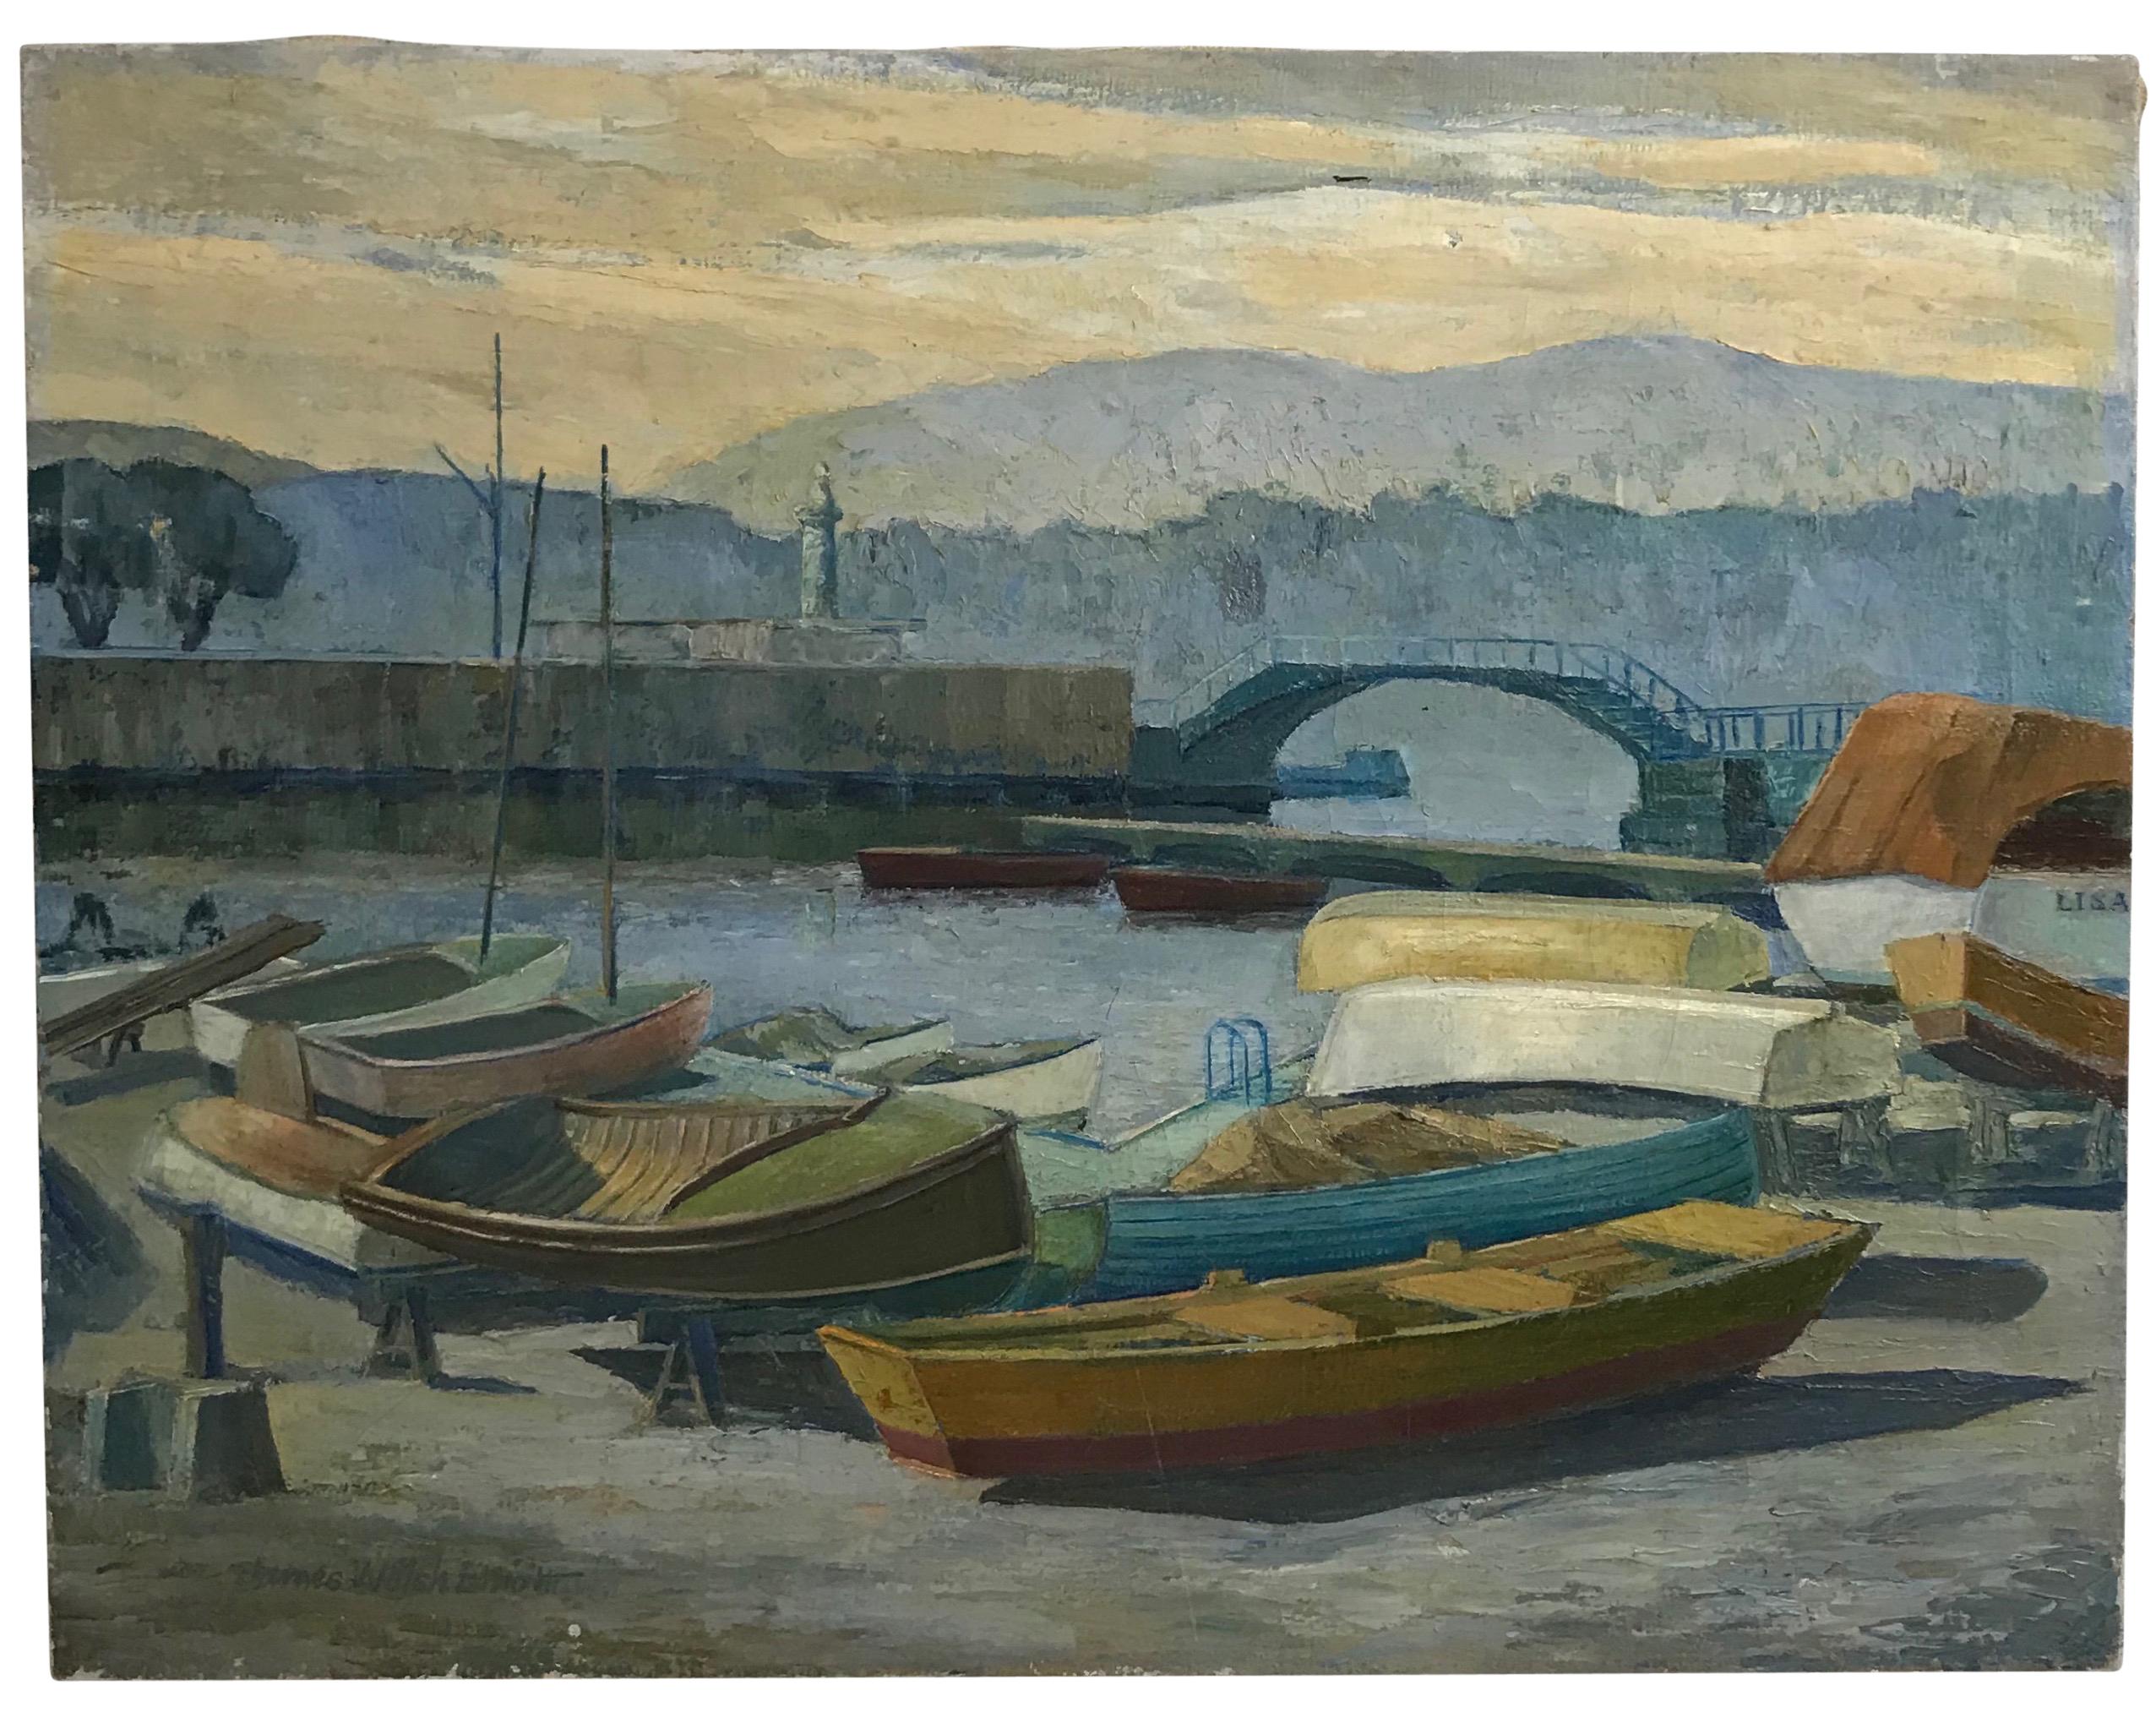 Beautifully painted California landscape of beached rowboats by James Welsh Elliott (b.1904-d.1977).
Oil on canvas, unframed. Signed lower left, and on back stretcher.
Born in Stockton, CA on March 7, 1904. Elliott was educated at the University